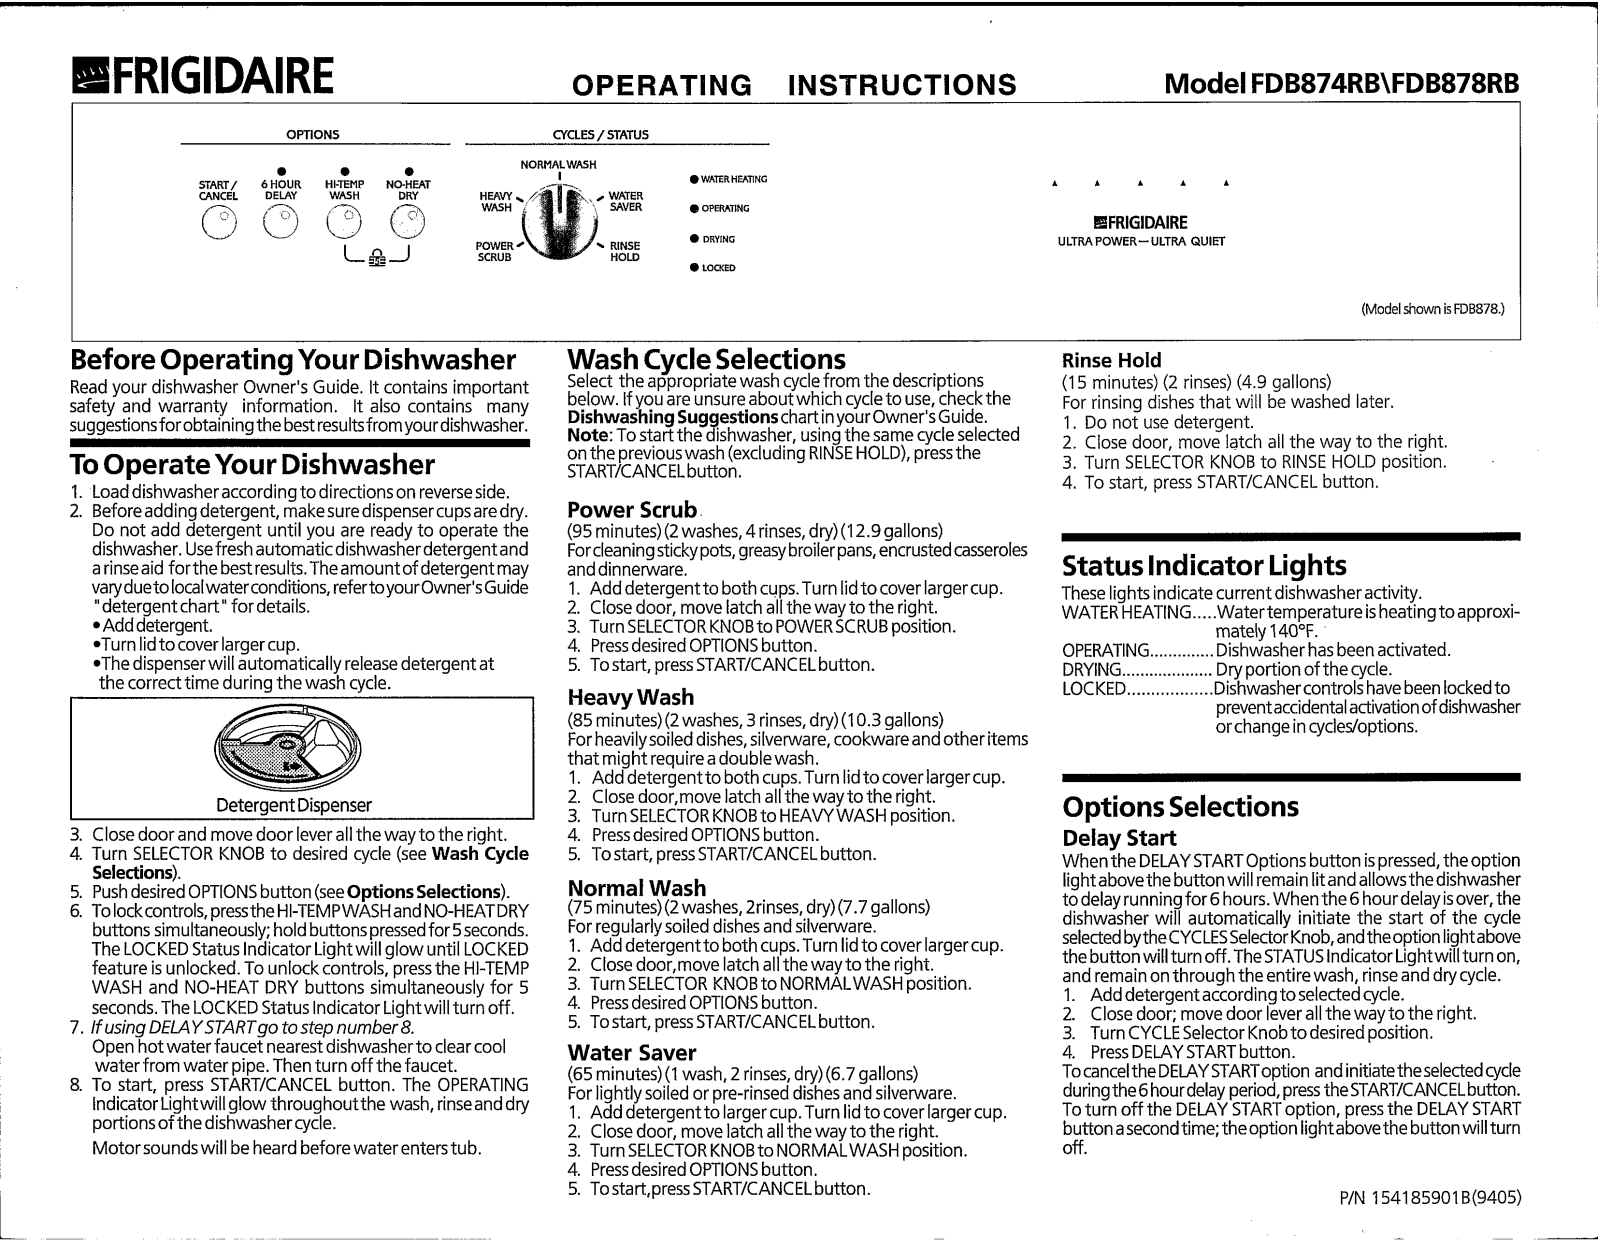 Frigidaire FDB878RB Owner's Guide